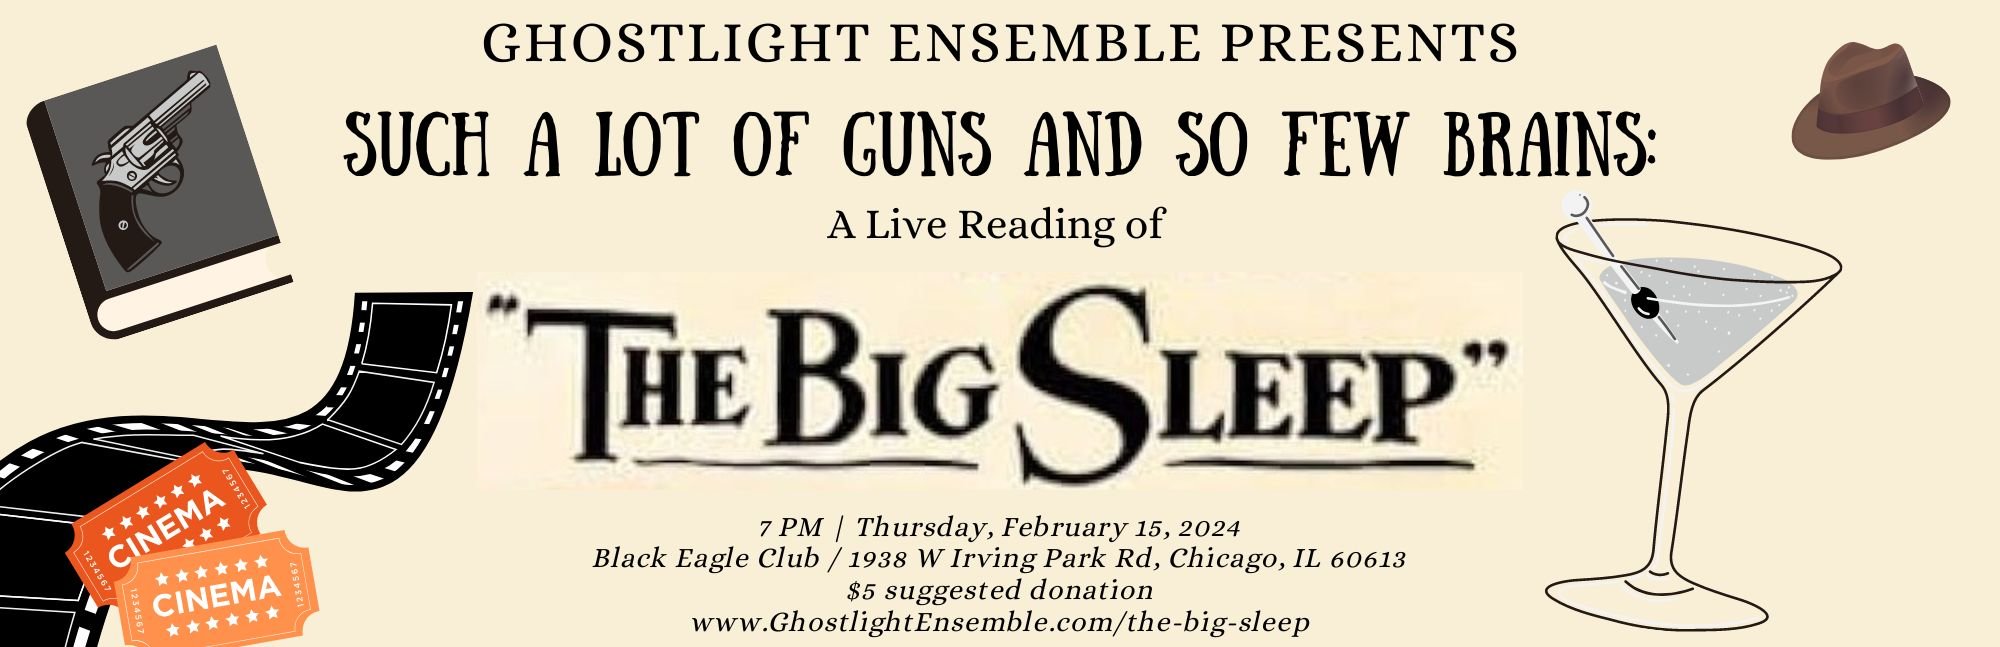 Such A Lot of Guns And So Few Brains: A Live Reading of The Big Sleep